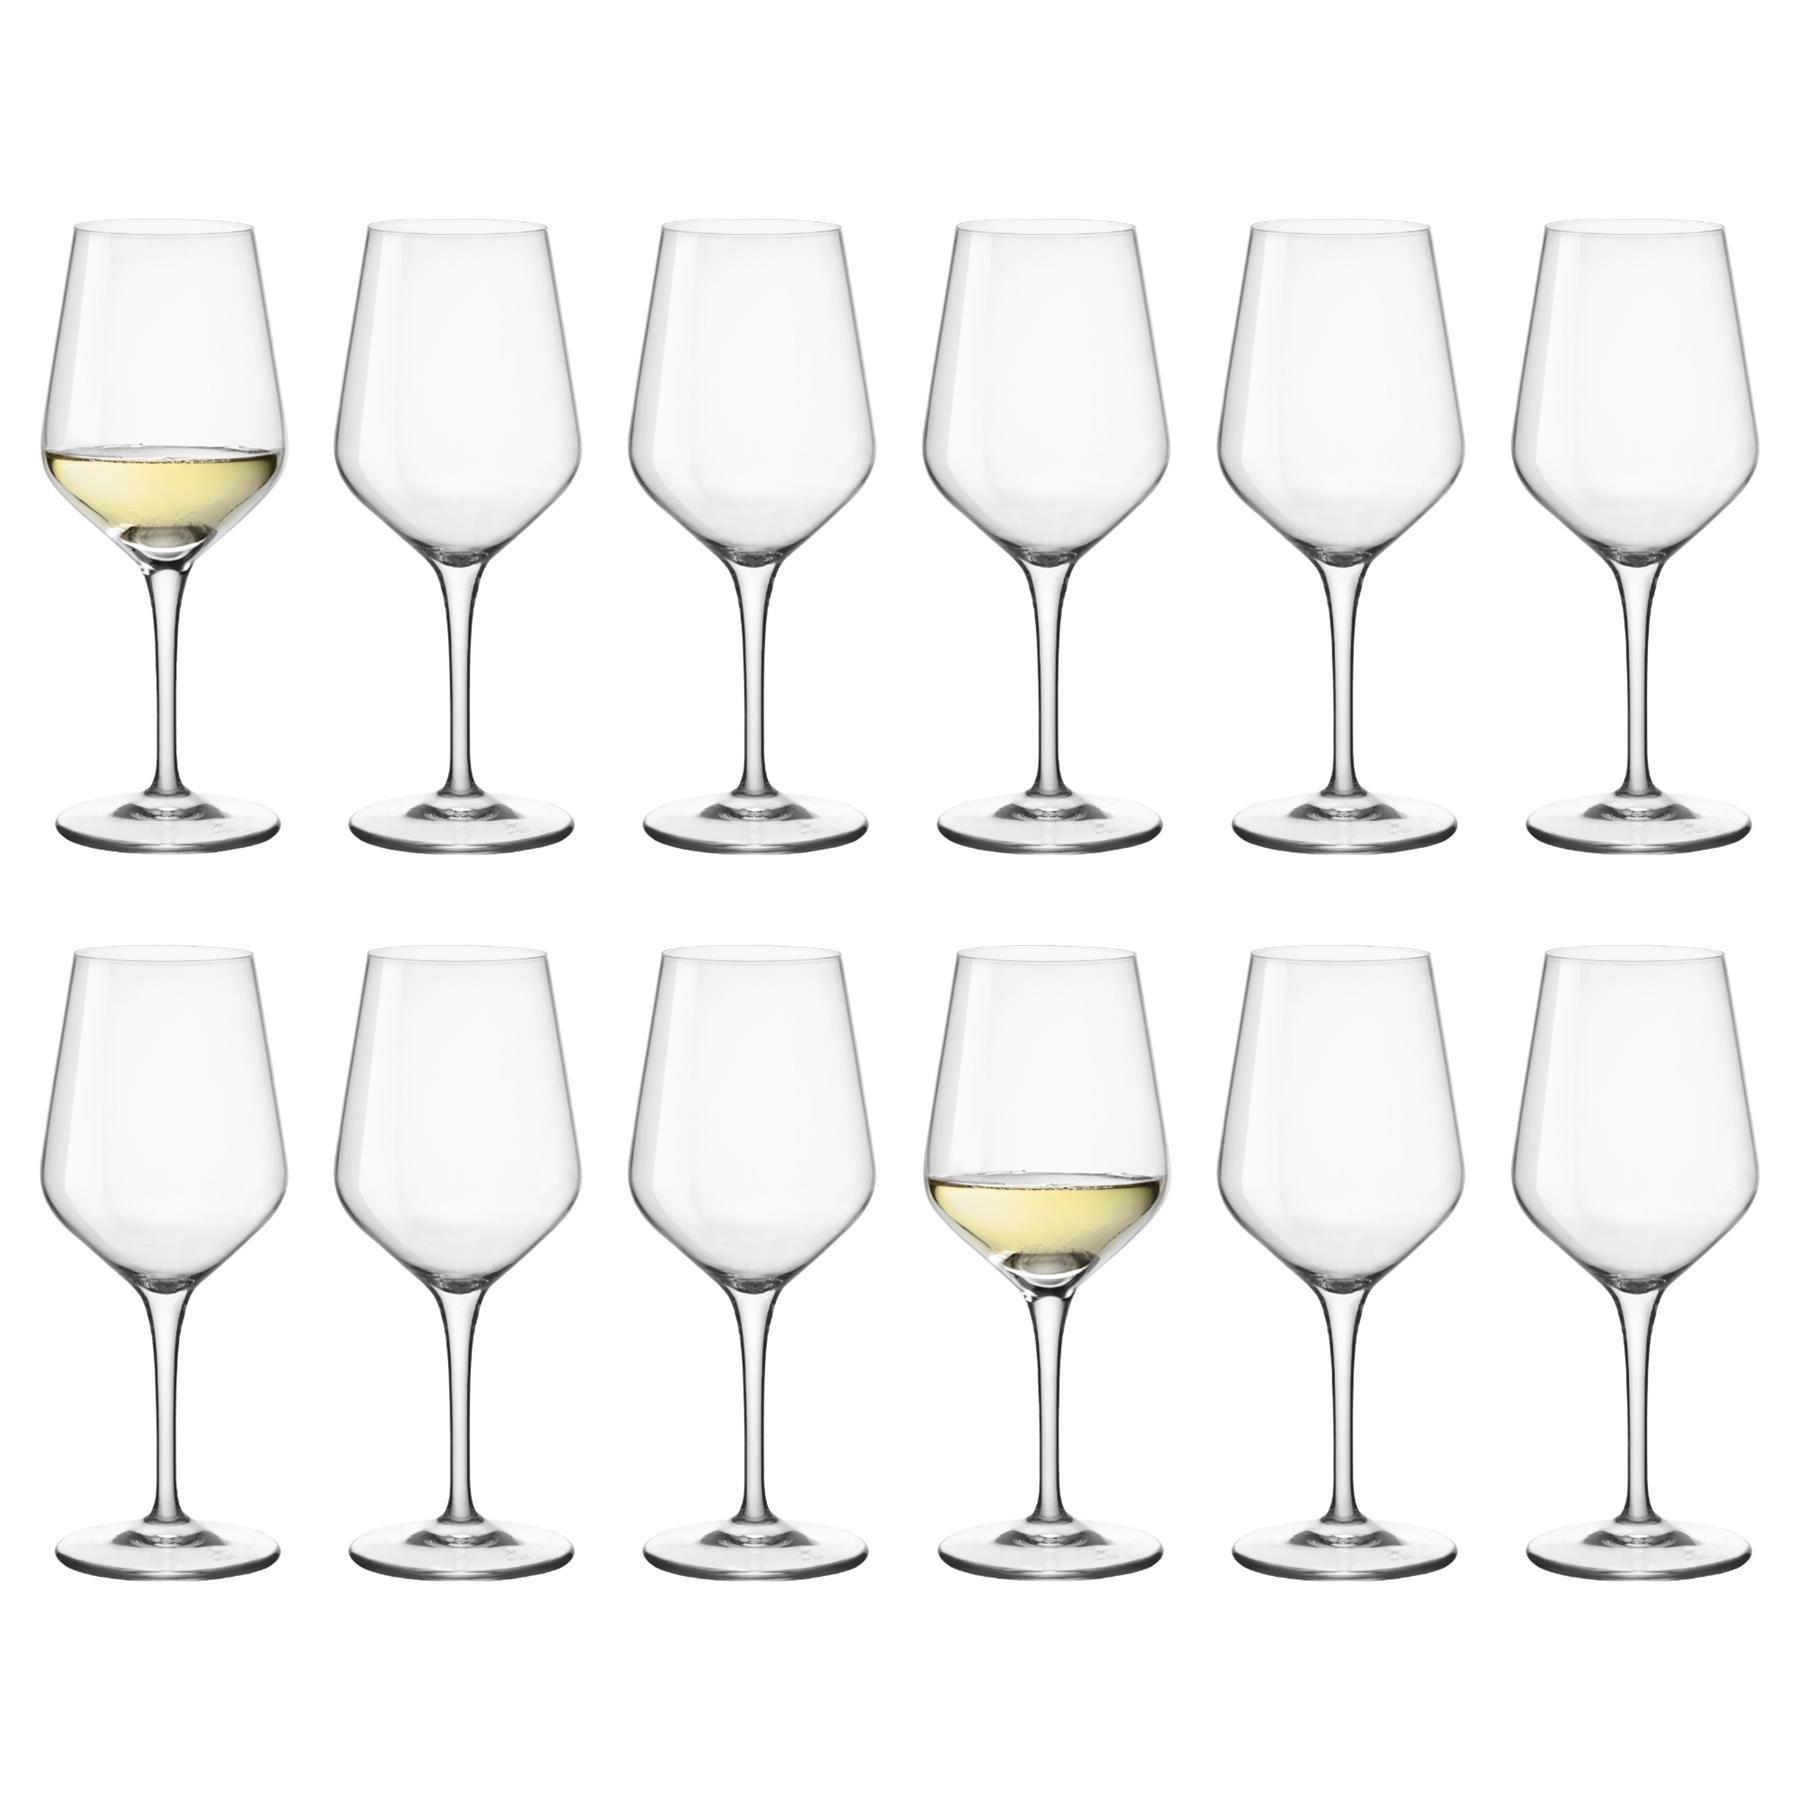 Electra White Wine Glasses - 350ml - Pack of 12